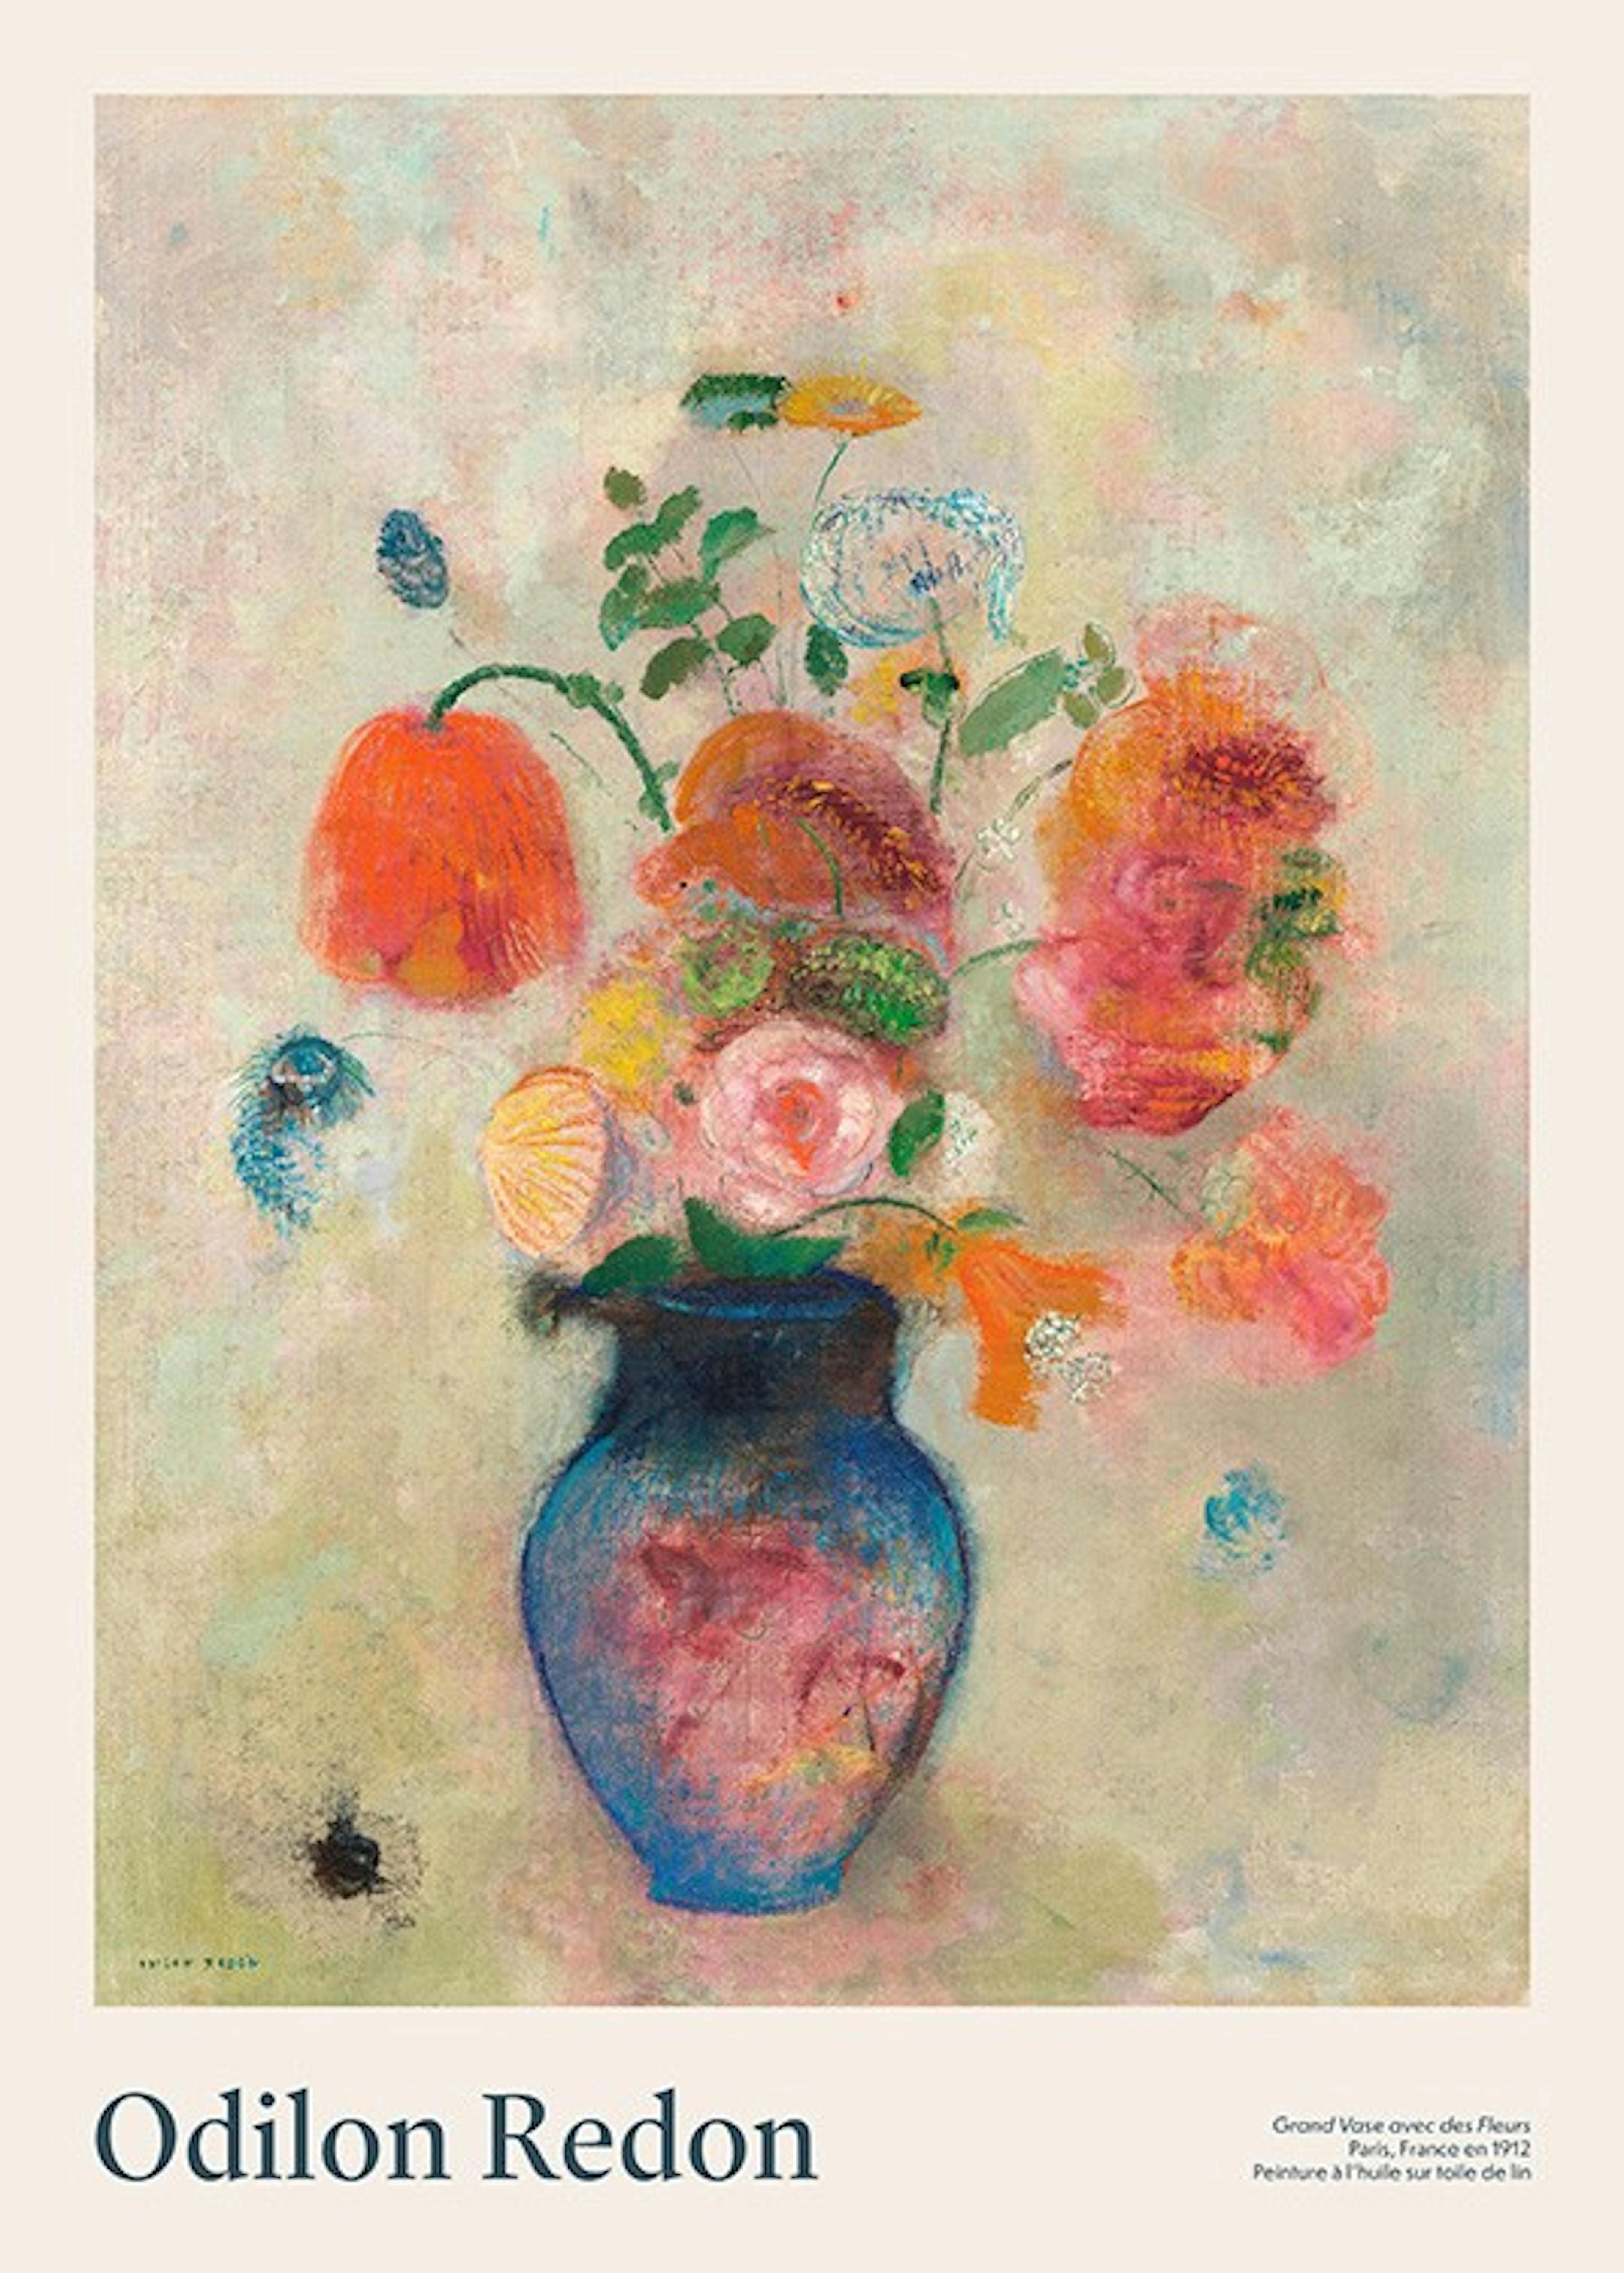 Odilon Redon - Large Vase with Flowers Poster 0